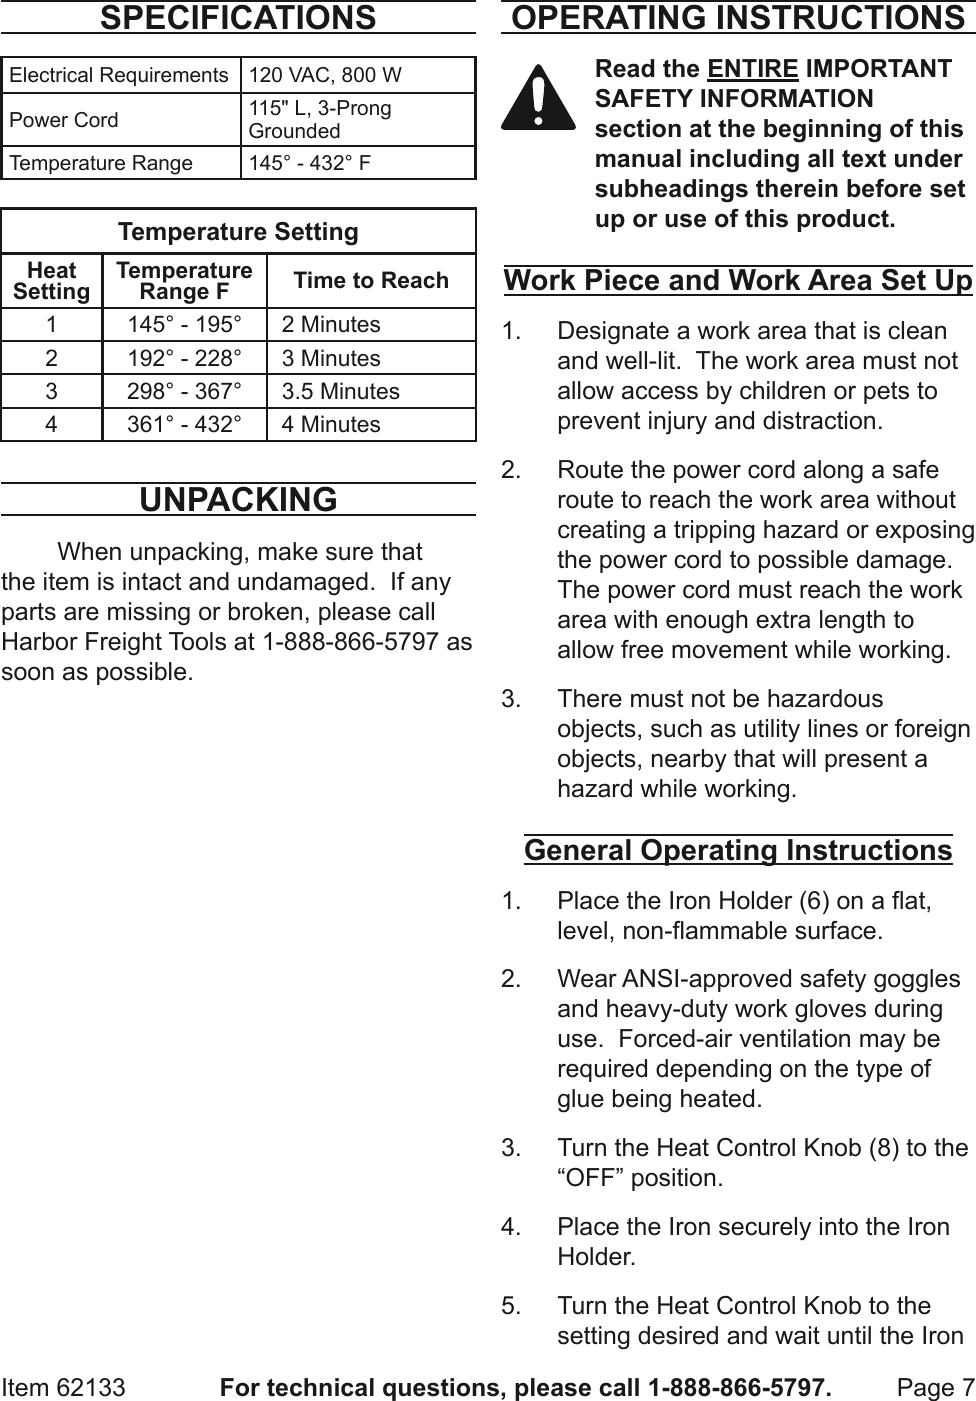 Page 7 of 12 - Harbor-Freight Harbor-Freight-Heat-Bond-Carpet-Seaming-Iron-Product-Manual-  Harbor-freight-heat-bond-carpet-seaming-iron-product-manual